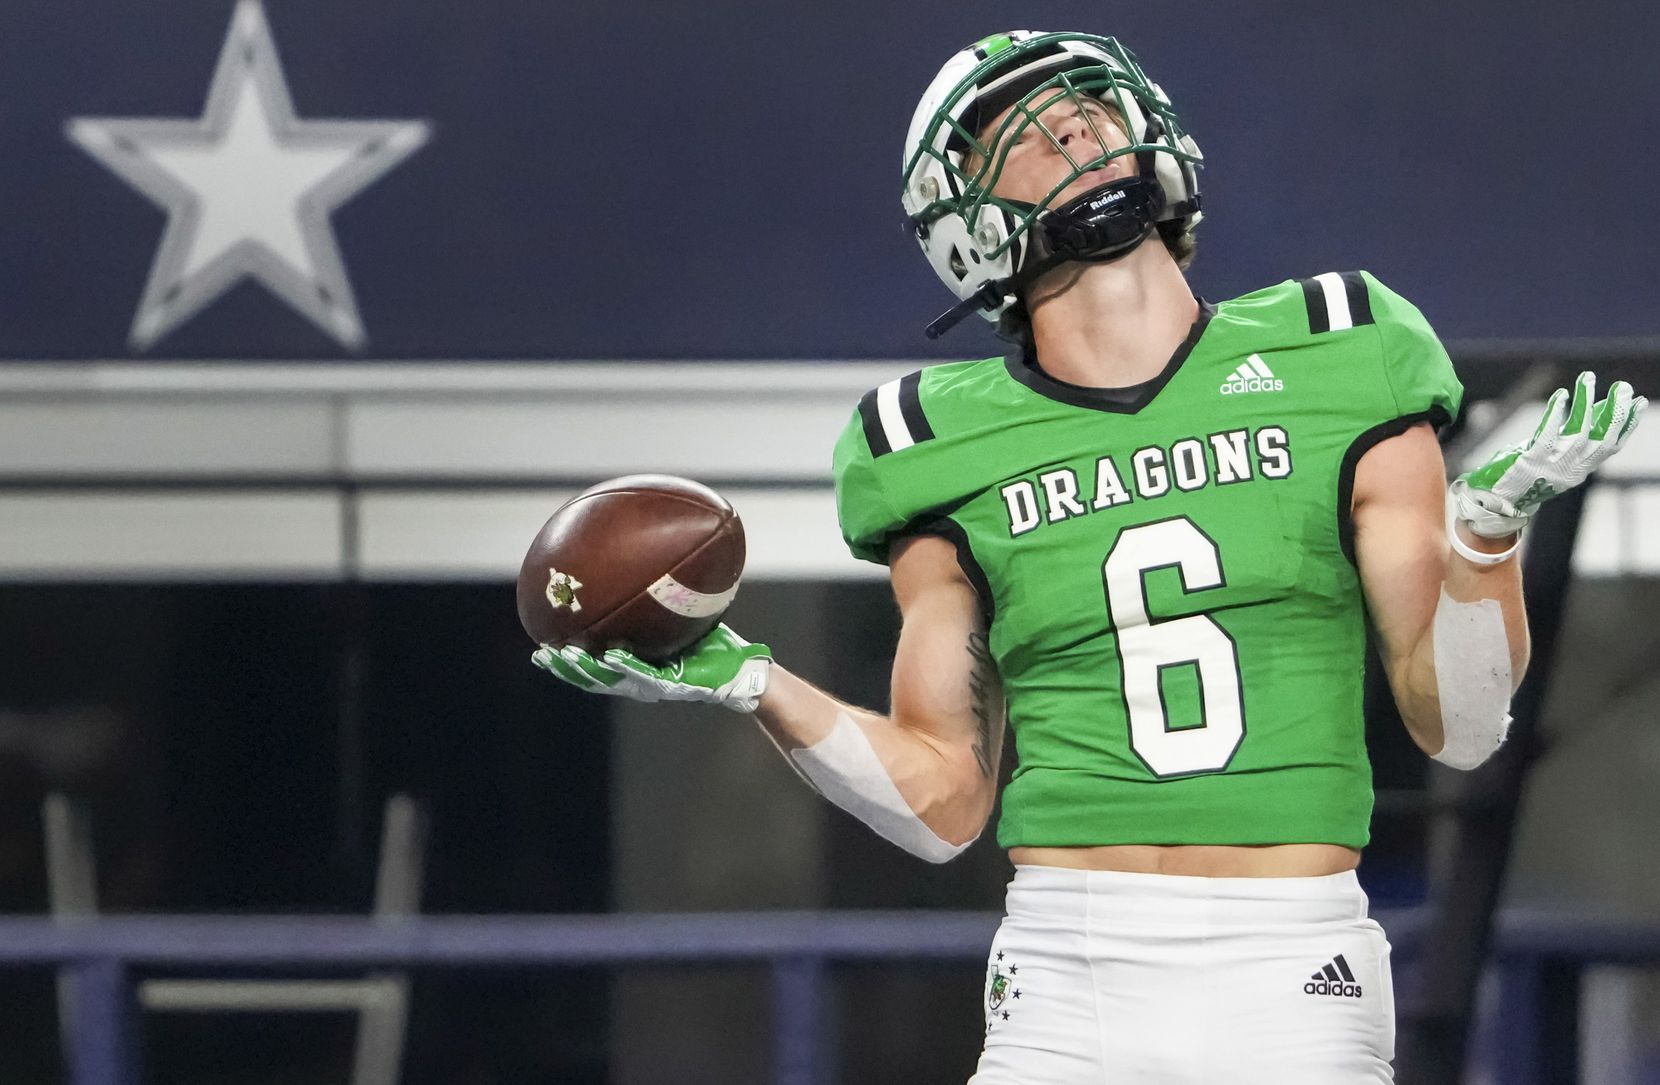 Southlake Carroll wide receiver Landon Samson (6) celebrates after scoring on a touchdown reception during the first half of a high school football game against Highland Park at AT&T Stadium on Thursday, Aug. 26, 2021, in Arlington.